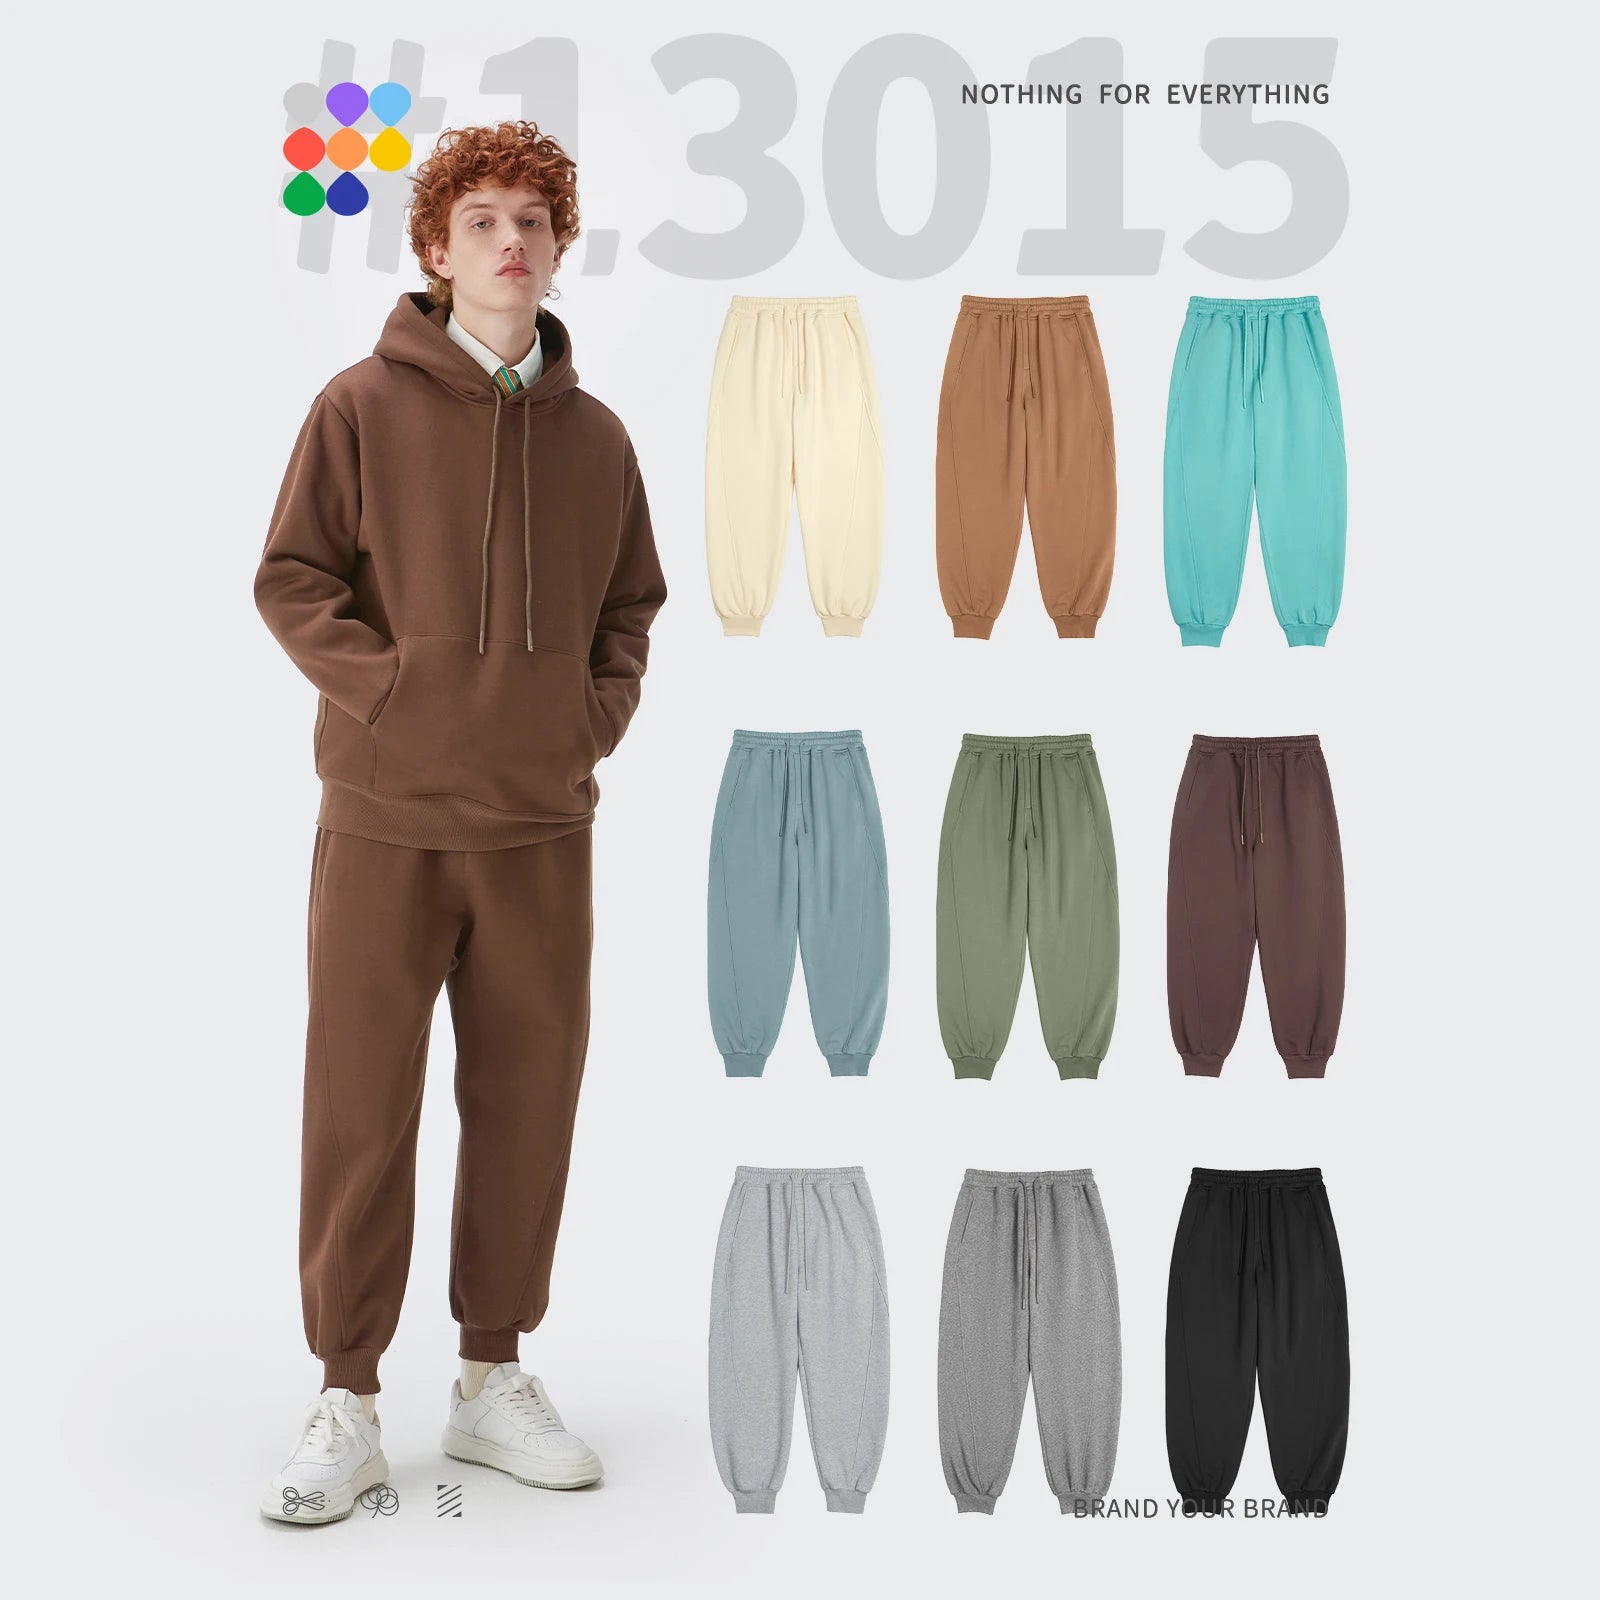 INFLATION Thick Fleece Sweatpant - INFLATION